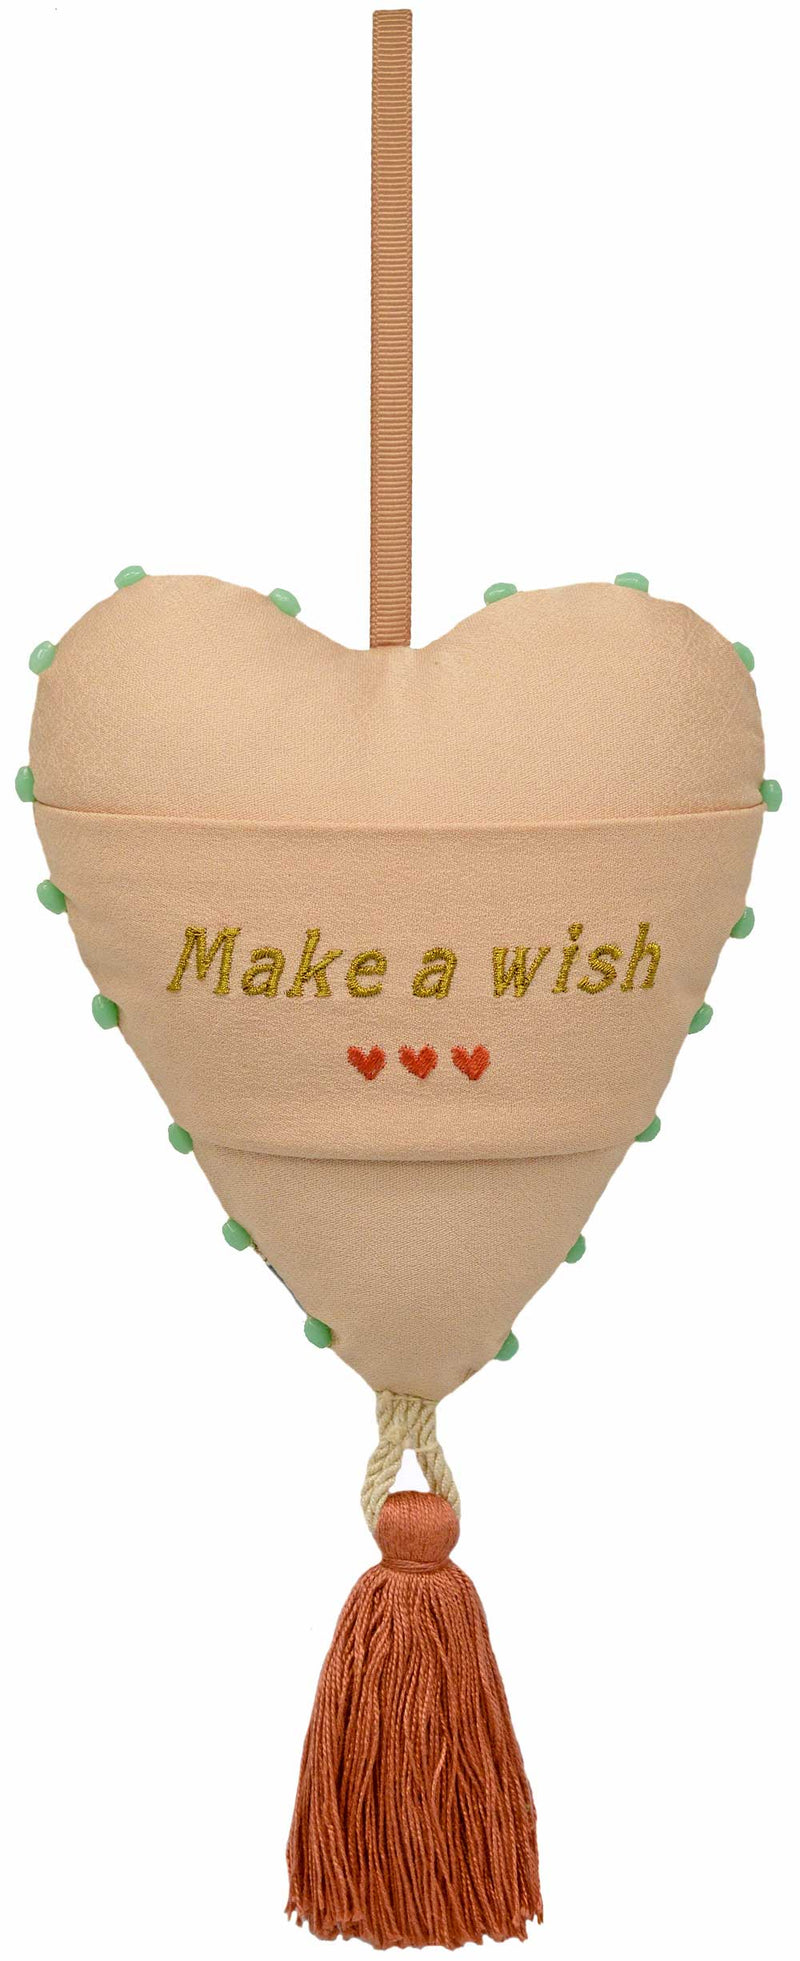 Antique fabric heart, hanging decoration in vintage fabrics, make a wish charm